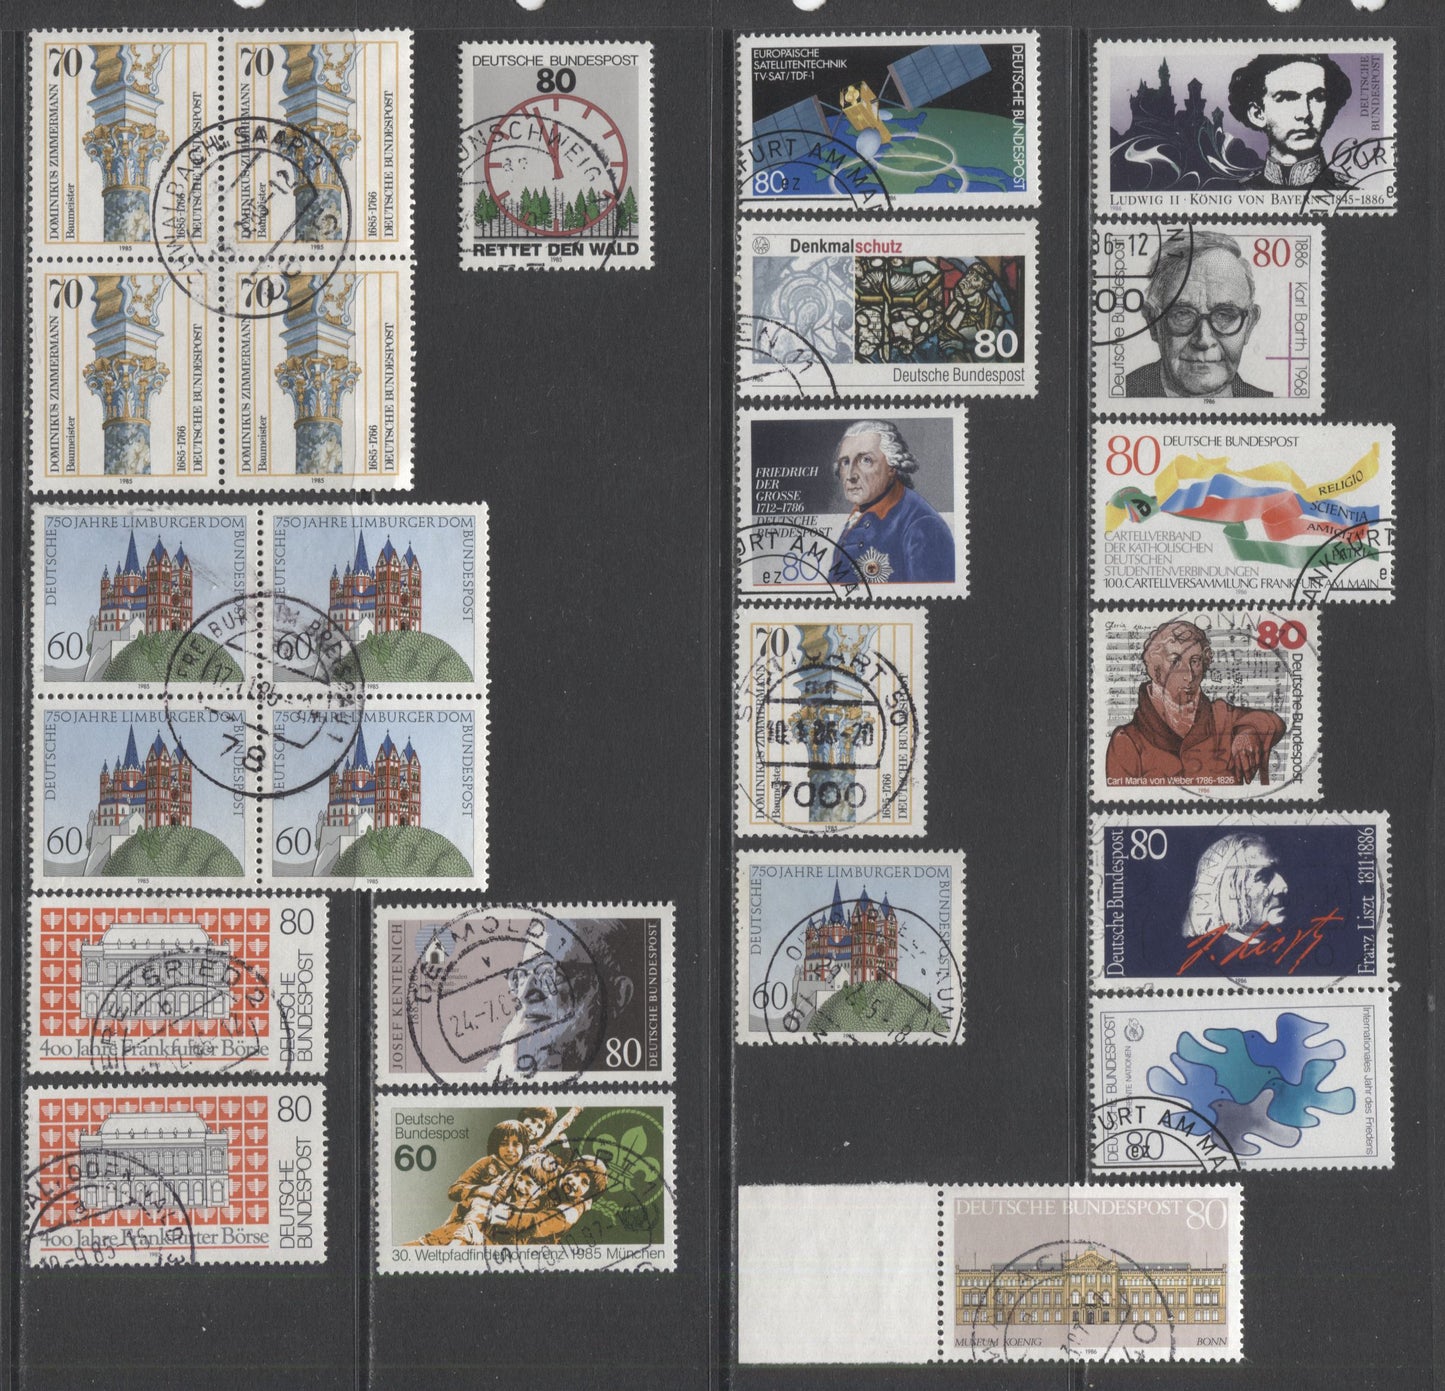 Lot 94 Germany SC#1442-1469 1985-1986 Commemoratives, A VF Used Range Of Singles & Blocks Of 4, 2017 Scott Cat. $15 USD, Click on Listing to See ALL Pictures